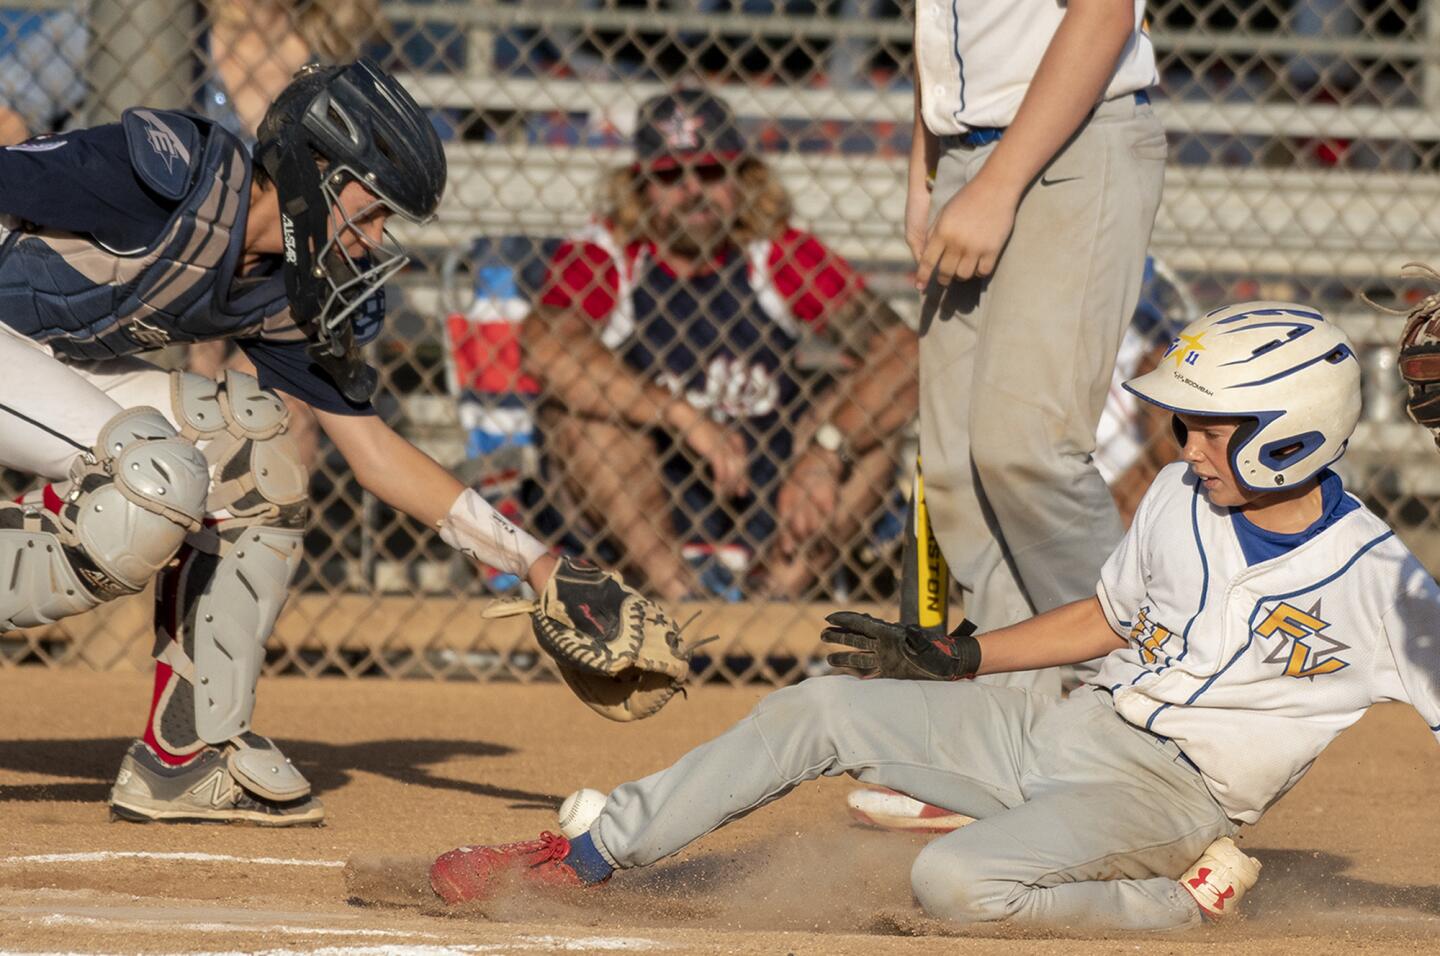 Fountain Valley's Quinn Hartman scores in the fith inning against Irvine during a PONY Bronco 12-and-under Regional tournament at Hicks Canyon Park in Irvine on Thursday, July 12.